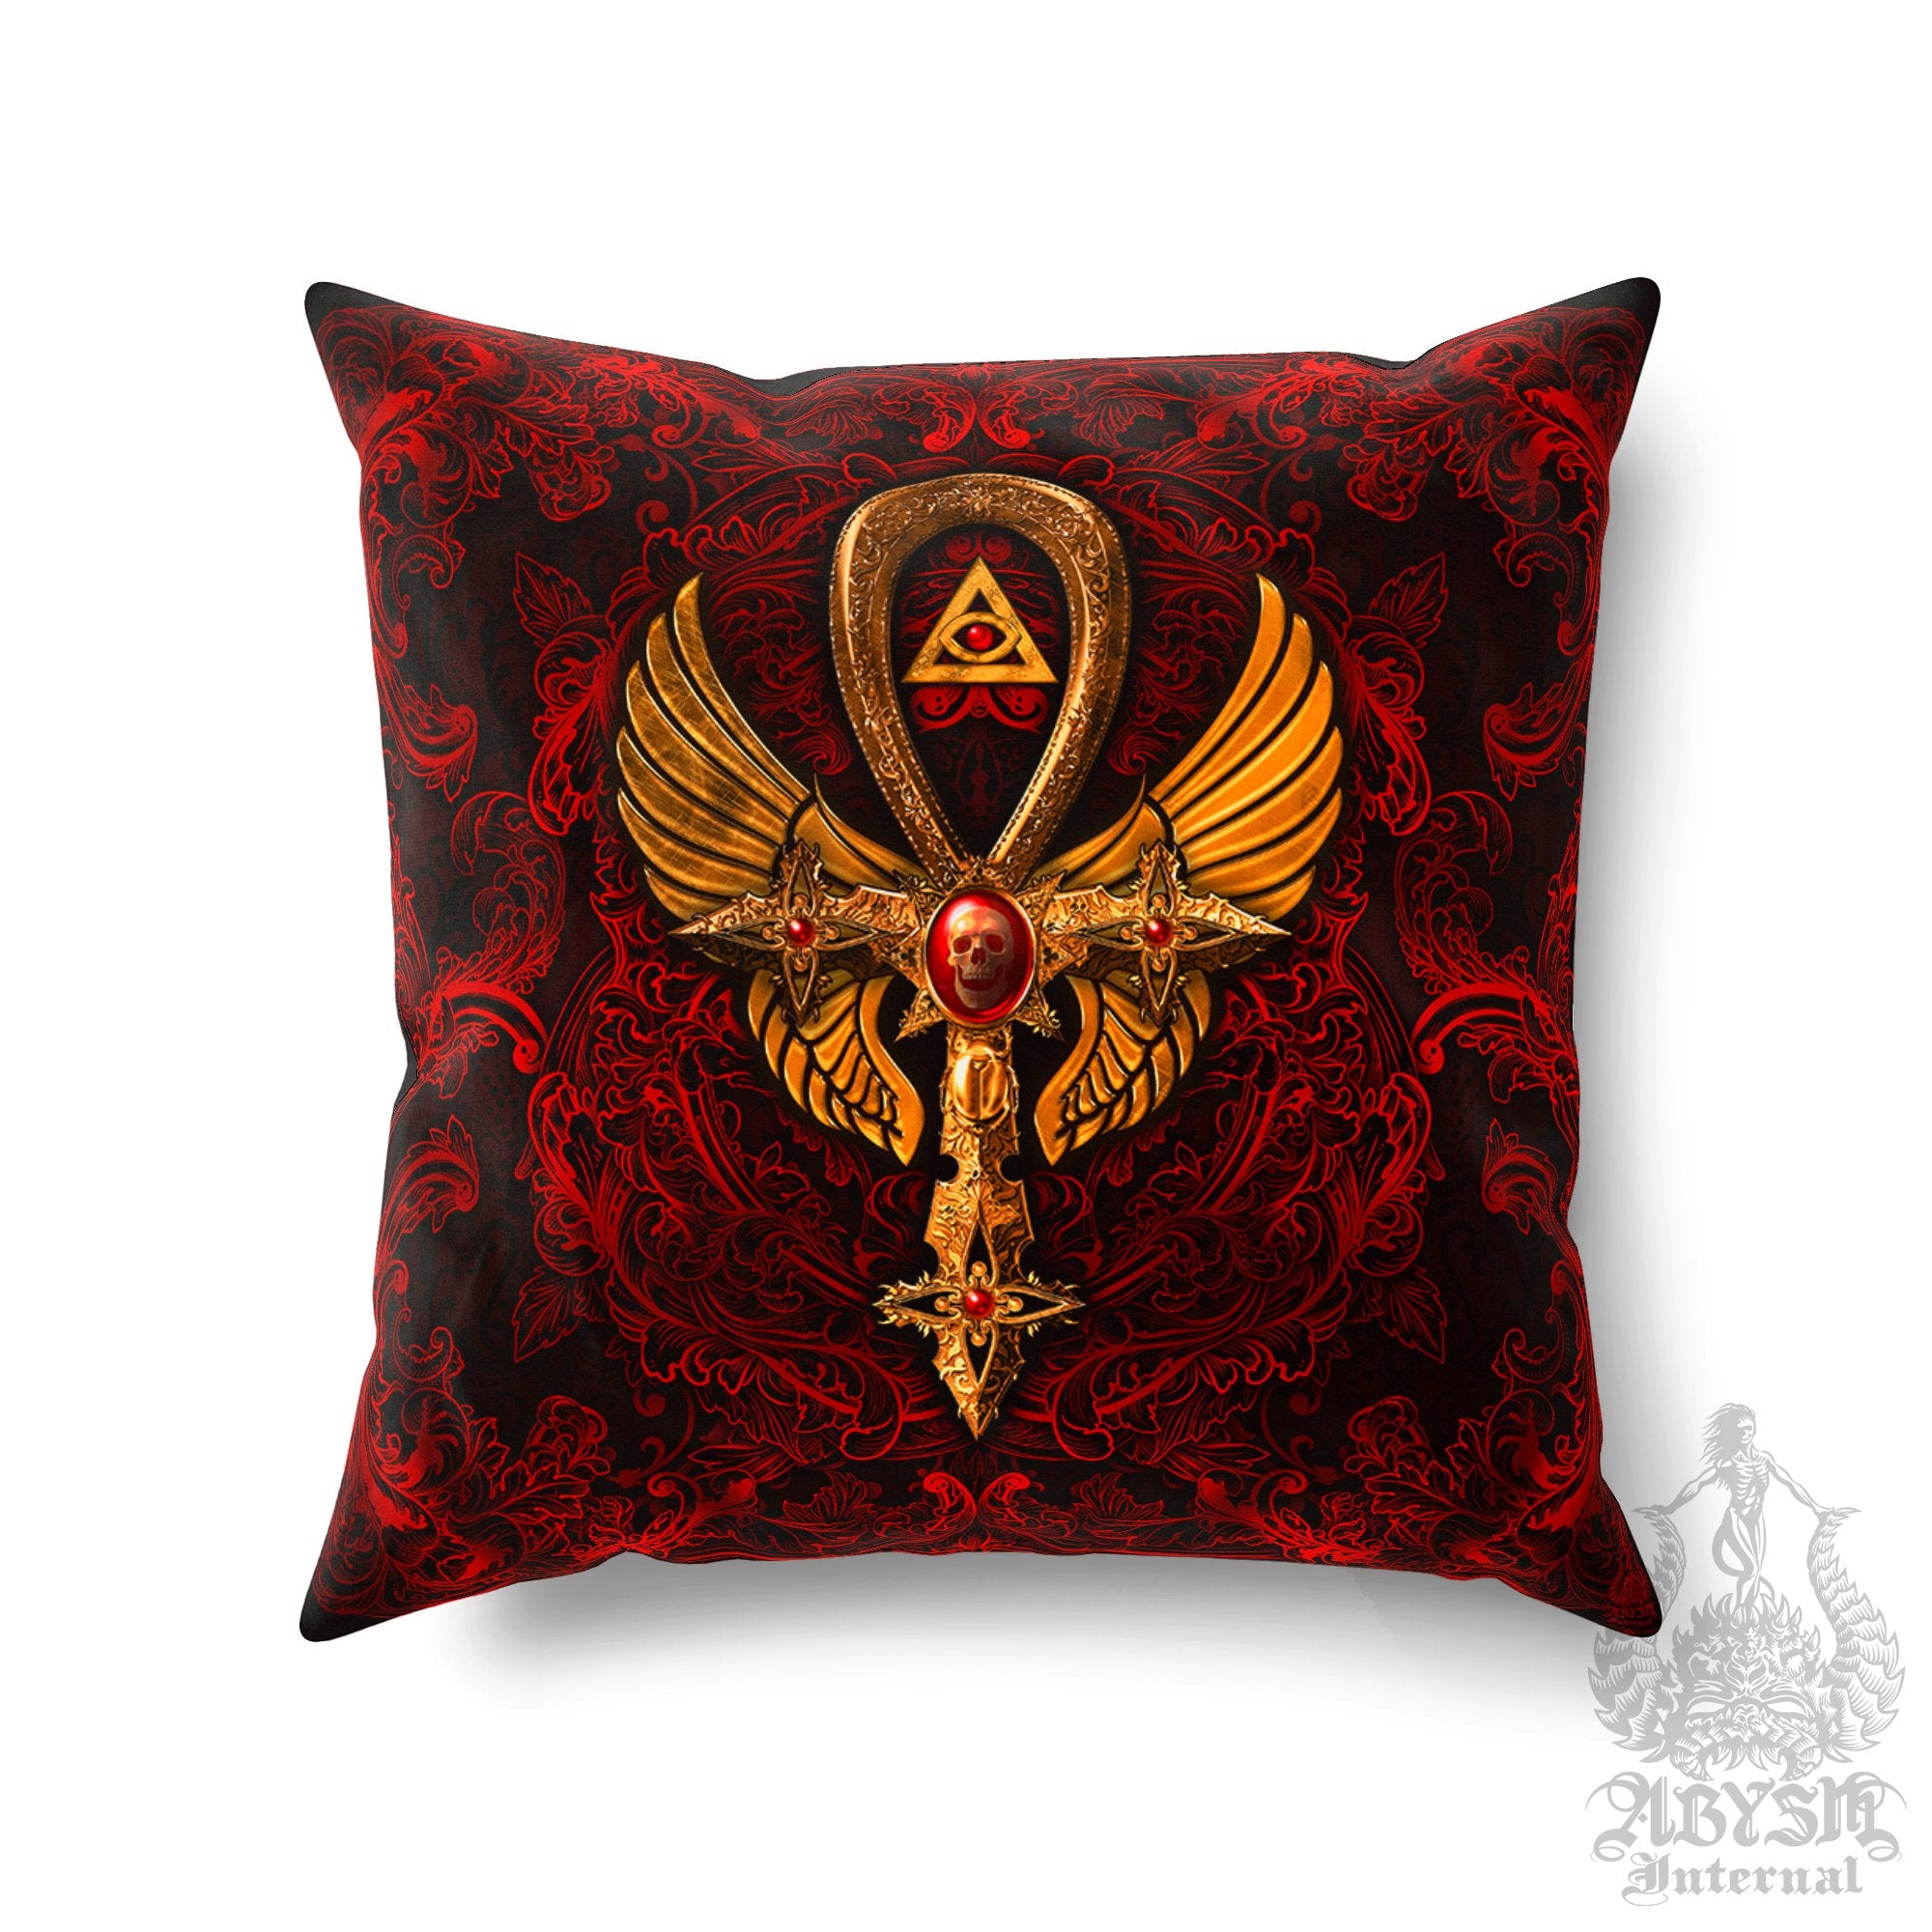 Gothic Throw Pillow, Decorative Accent Pillow, Square Cushion Cover, Bloody Goth Room Decor, Dark Red Art, Alternative Home - Ankh Cross, Gold, Black, 3 Colors - Abysm Internal